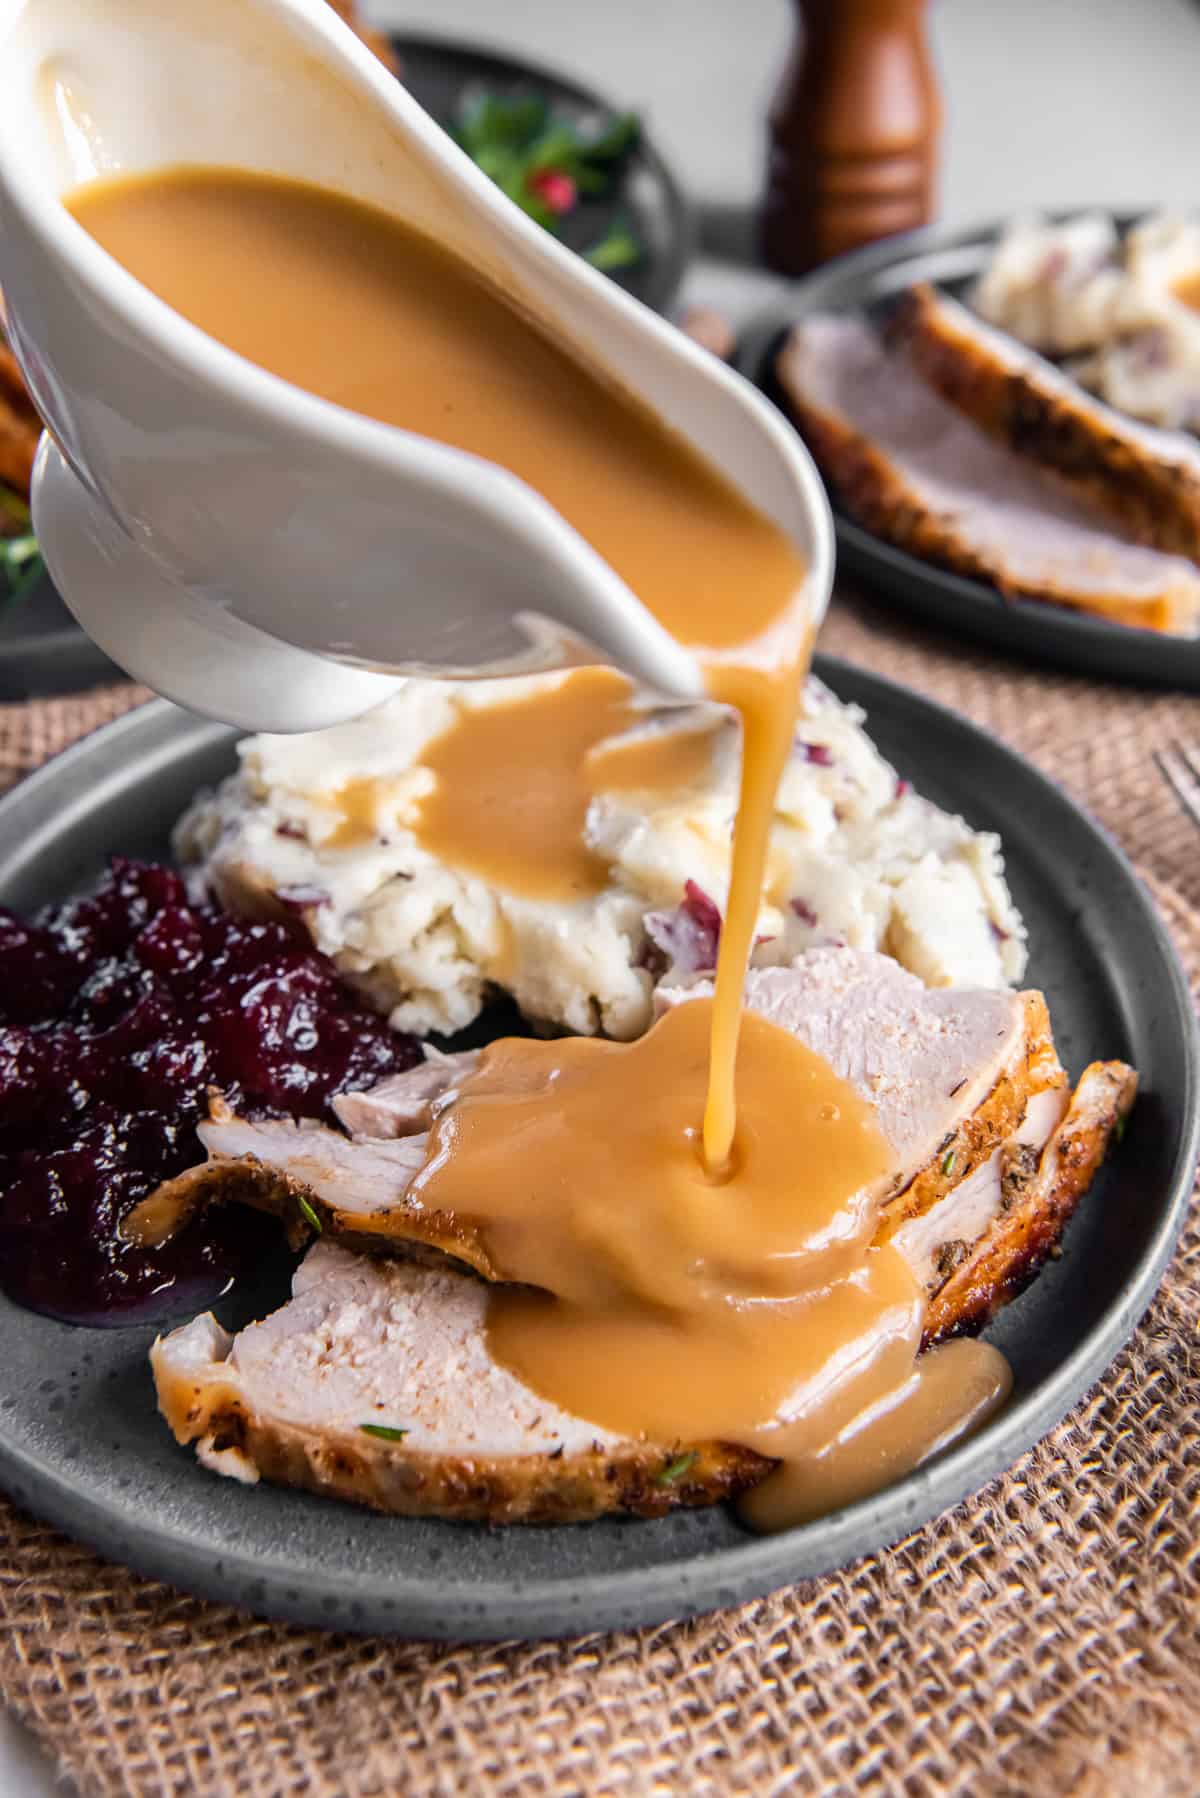 Slow cooker turkey gravy pouring from a gravy boat over slices of turkey on a plate.